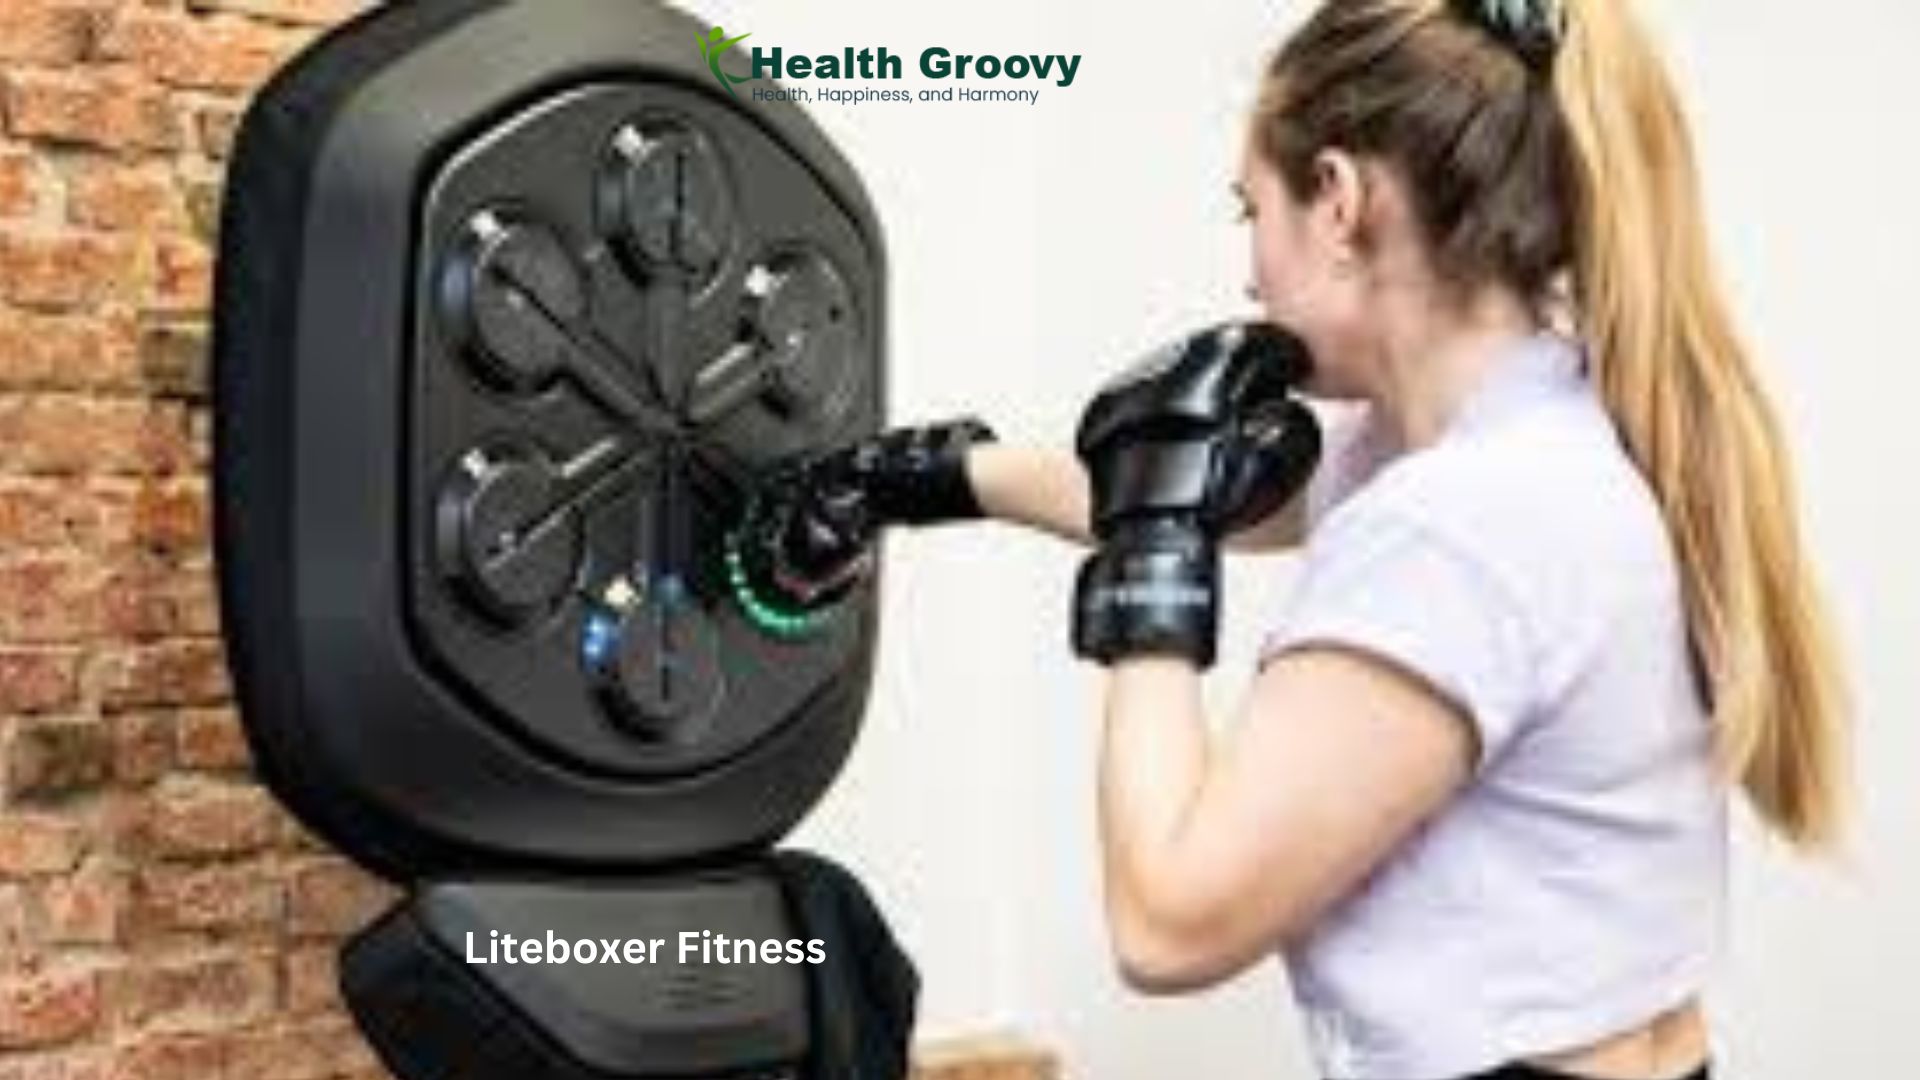 Liteboxer Fitness Bundle – What You Need To Know